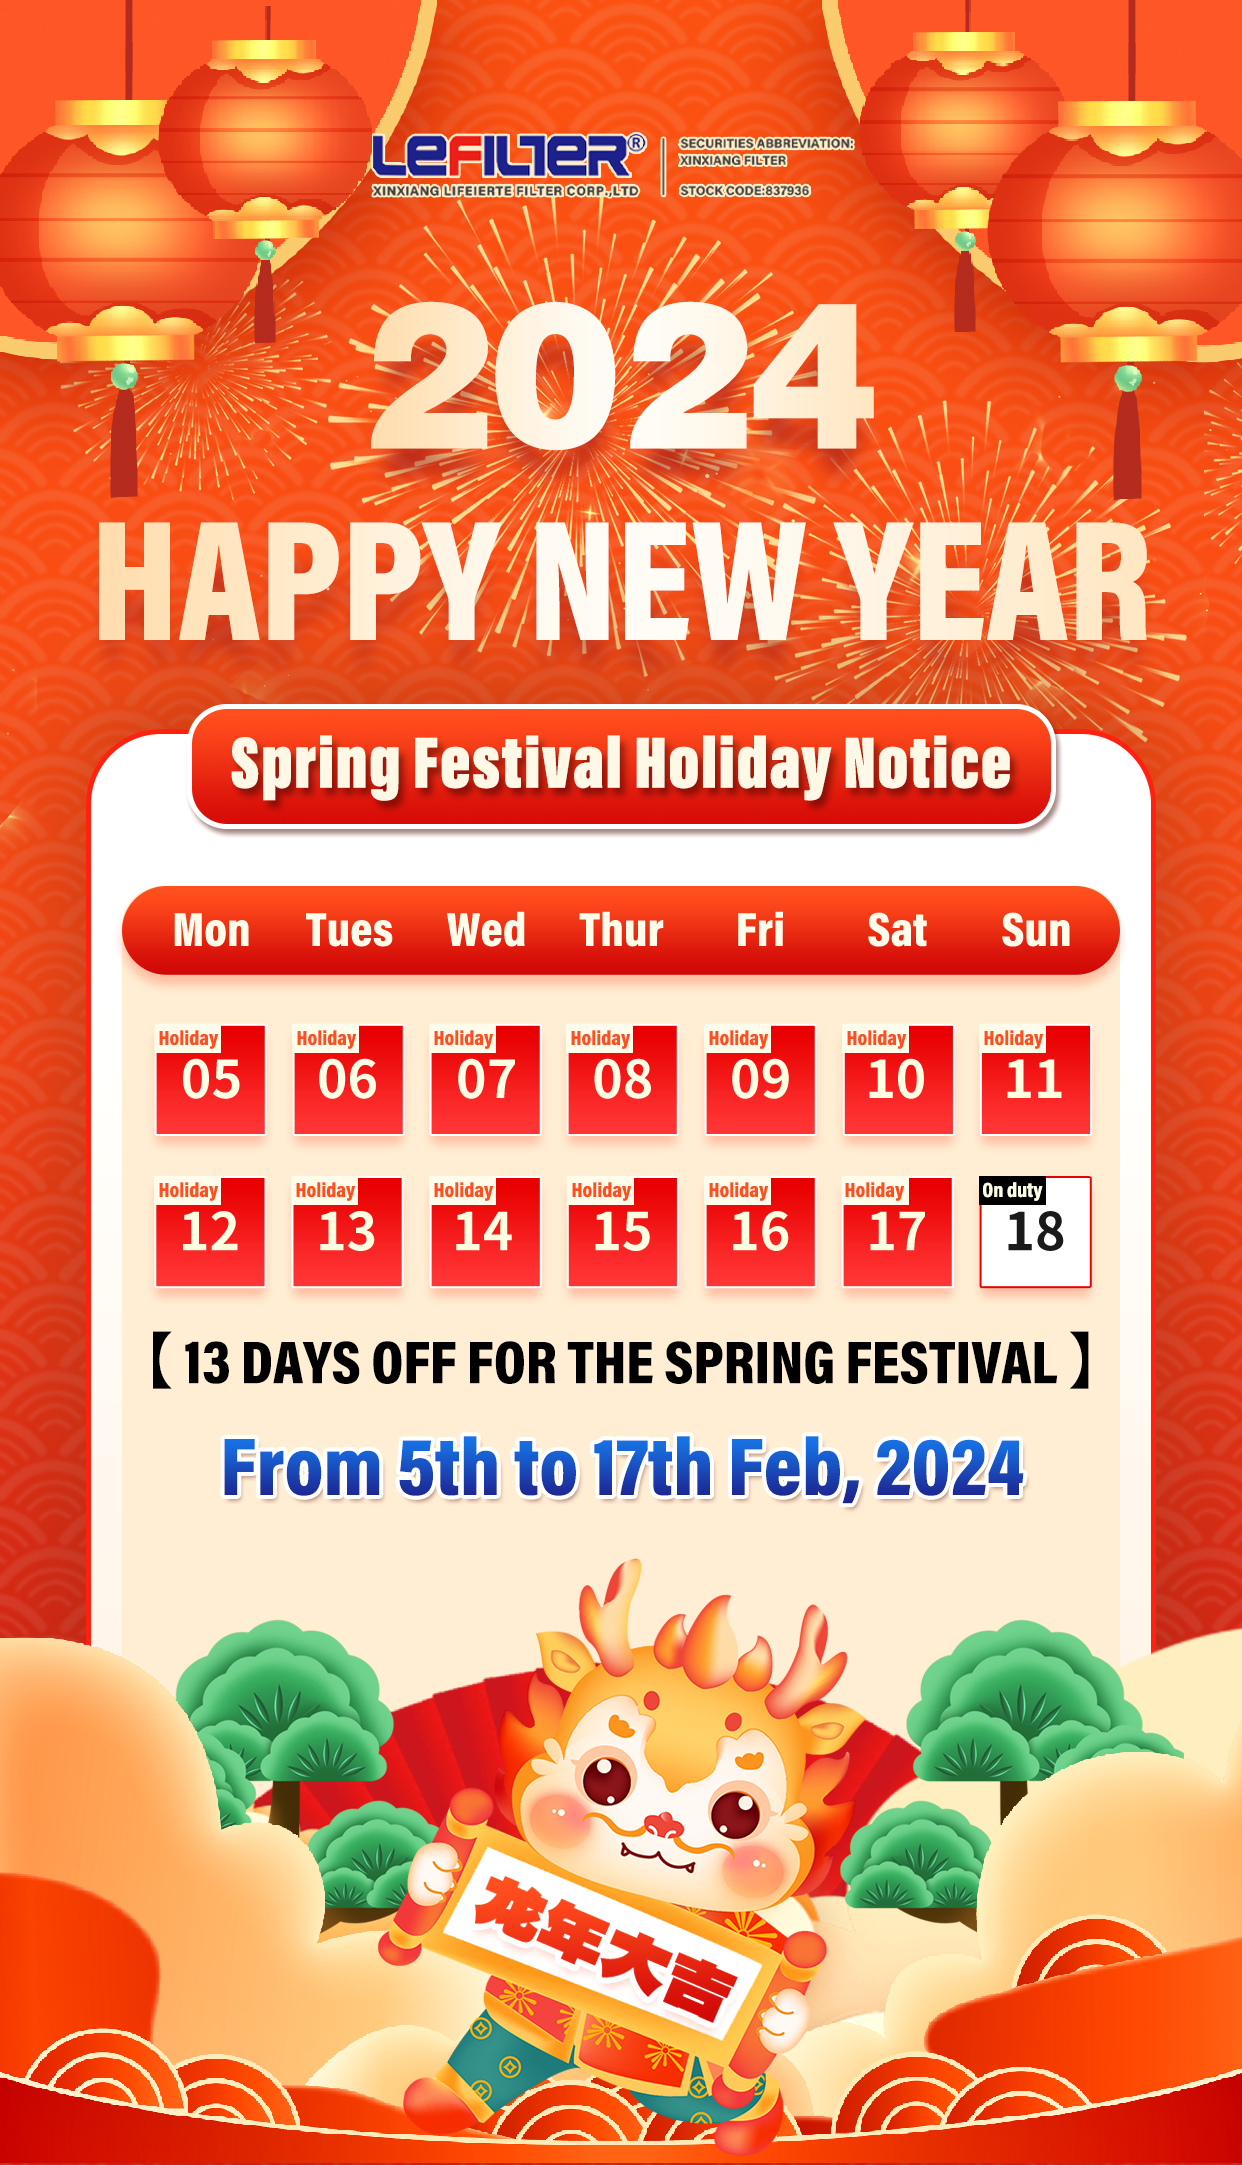 Notification of Chinese New Year Holiday Arrangements